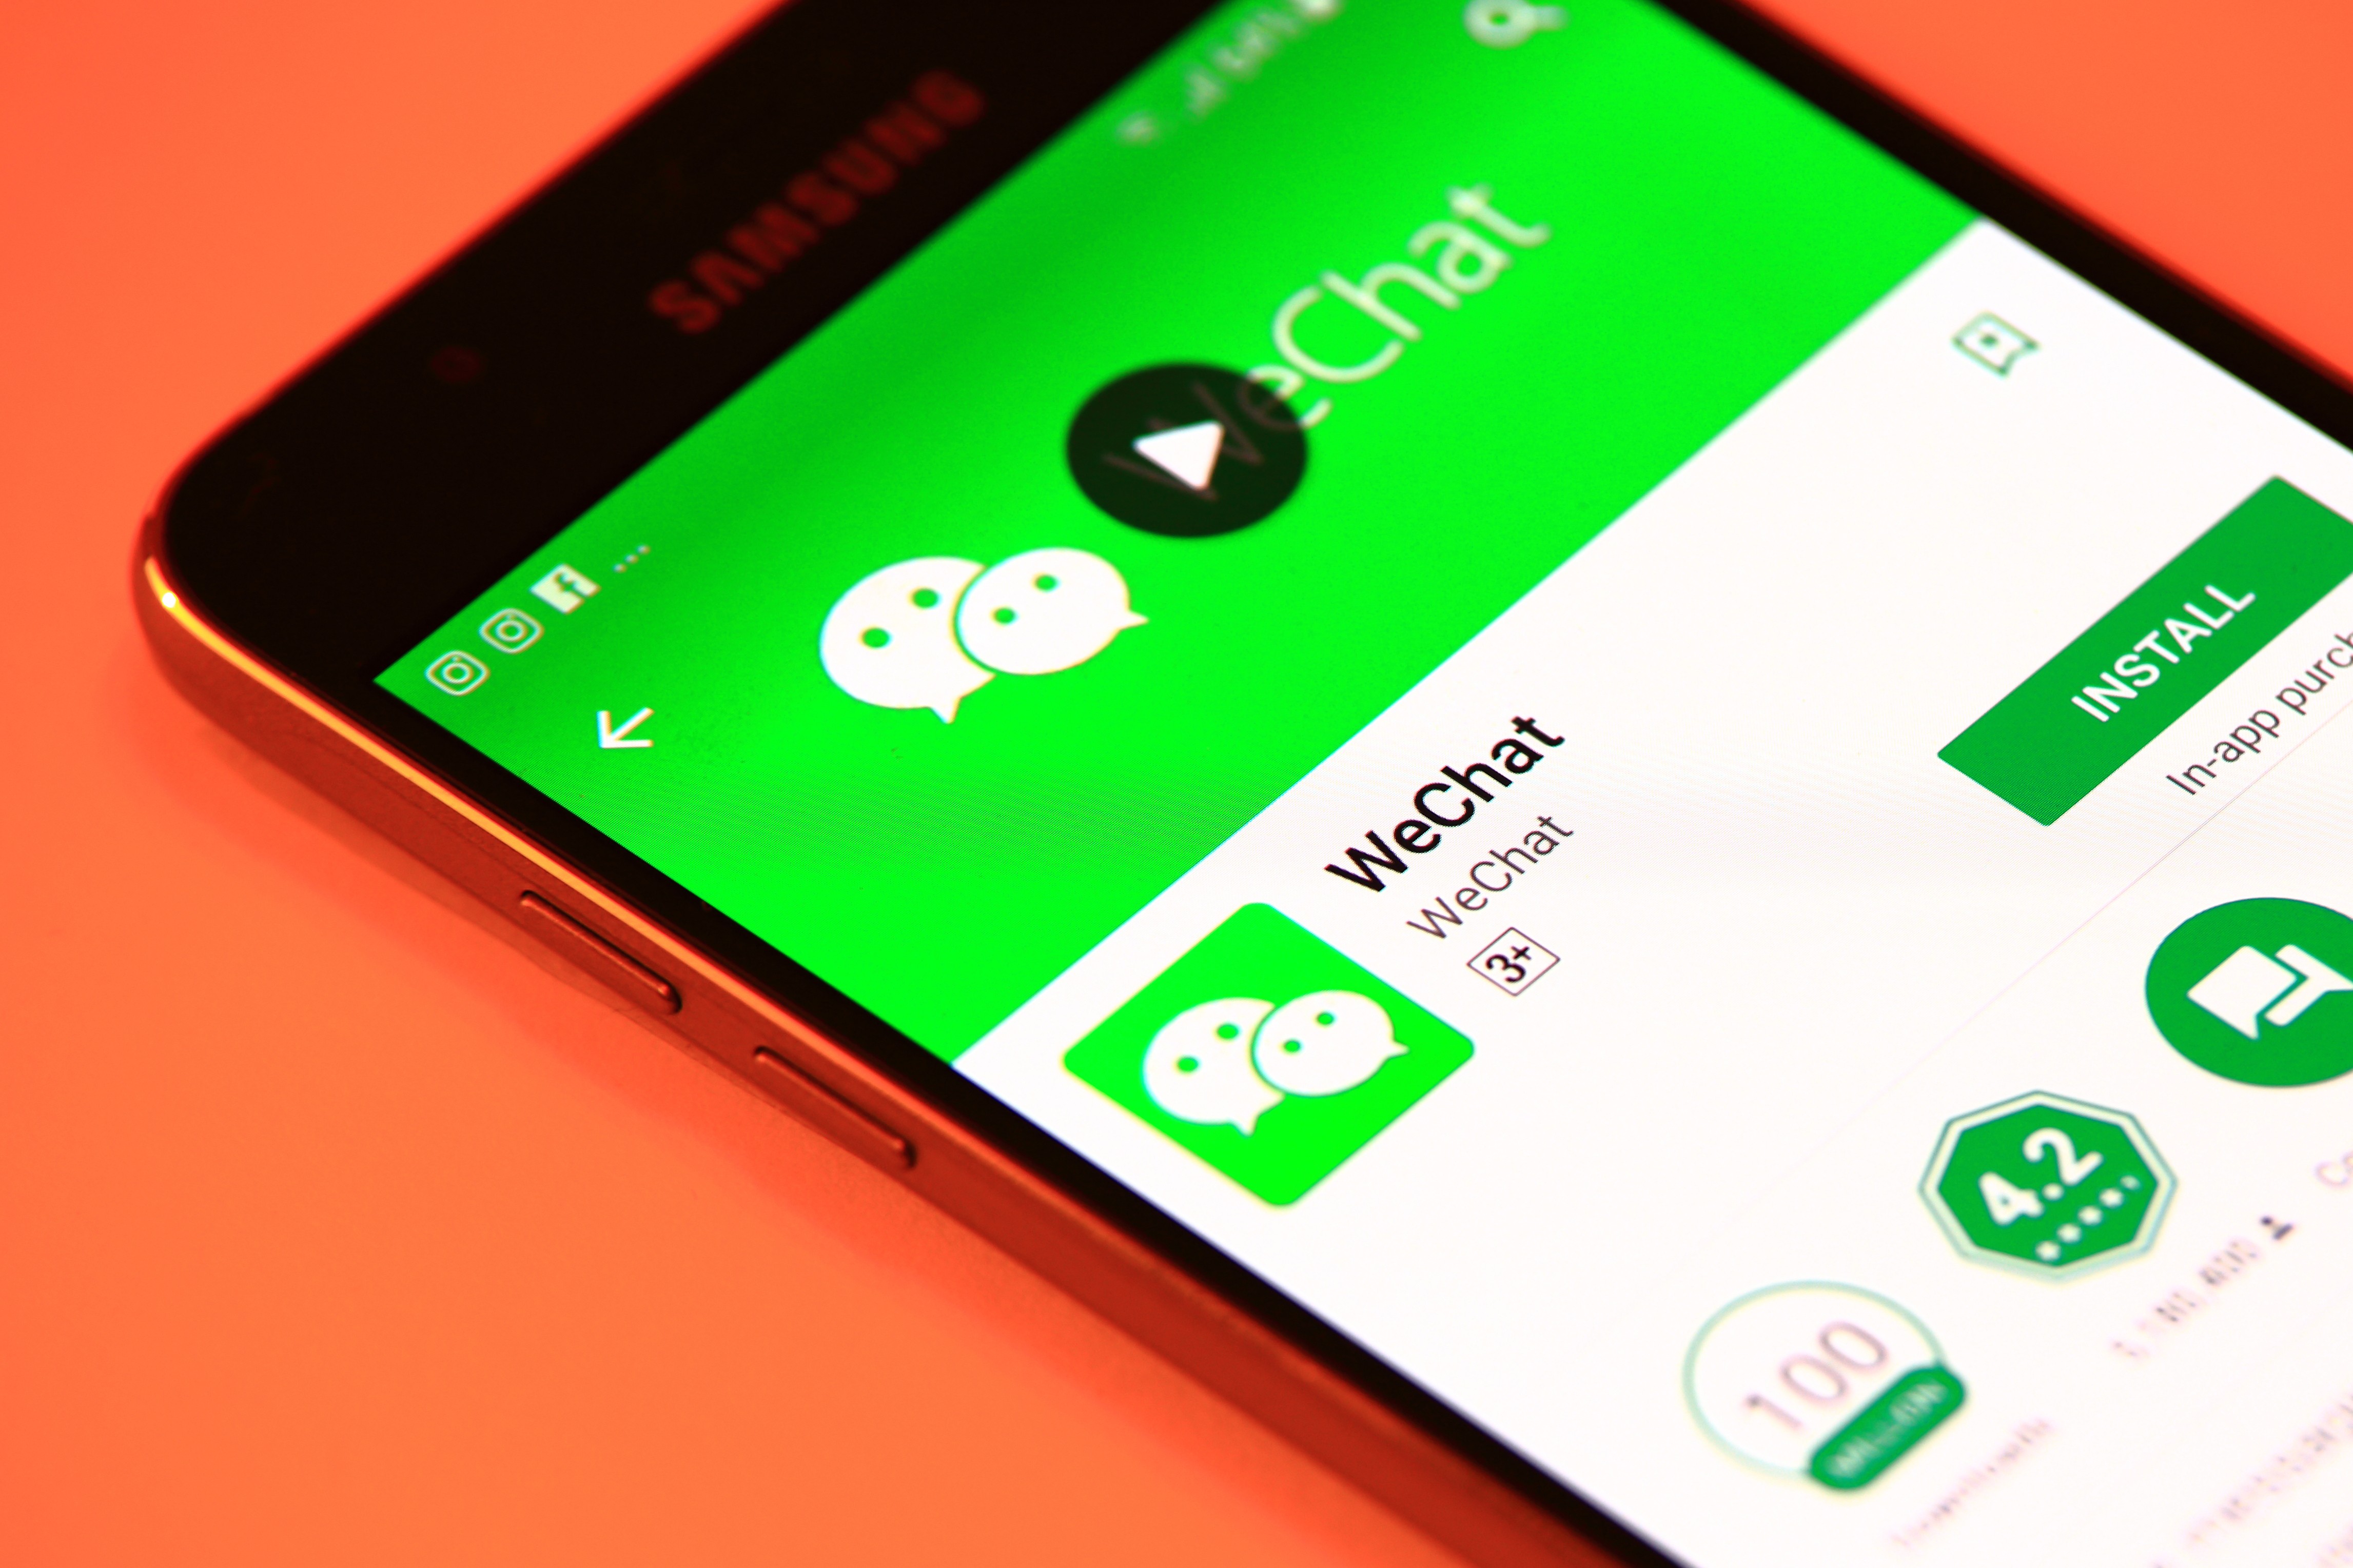 Unlike WhatsApp, WeChat can be used to do everything from ordering food and hailing taxis to paying for international flights. Photo: Shutterstock